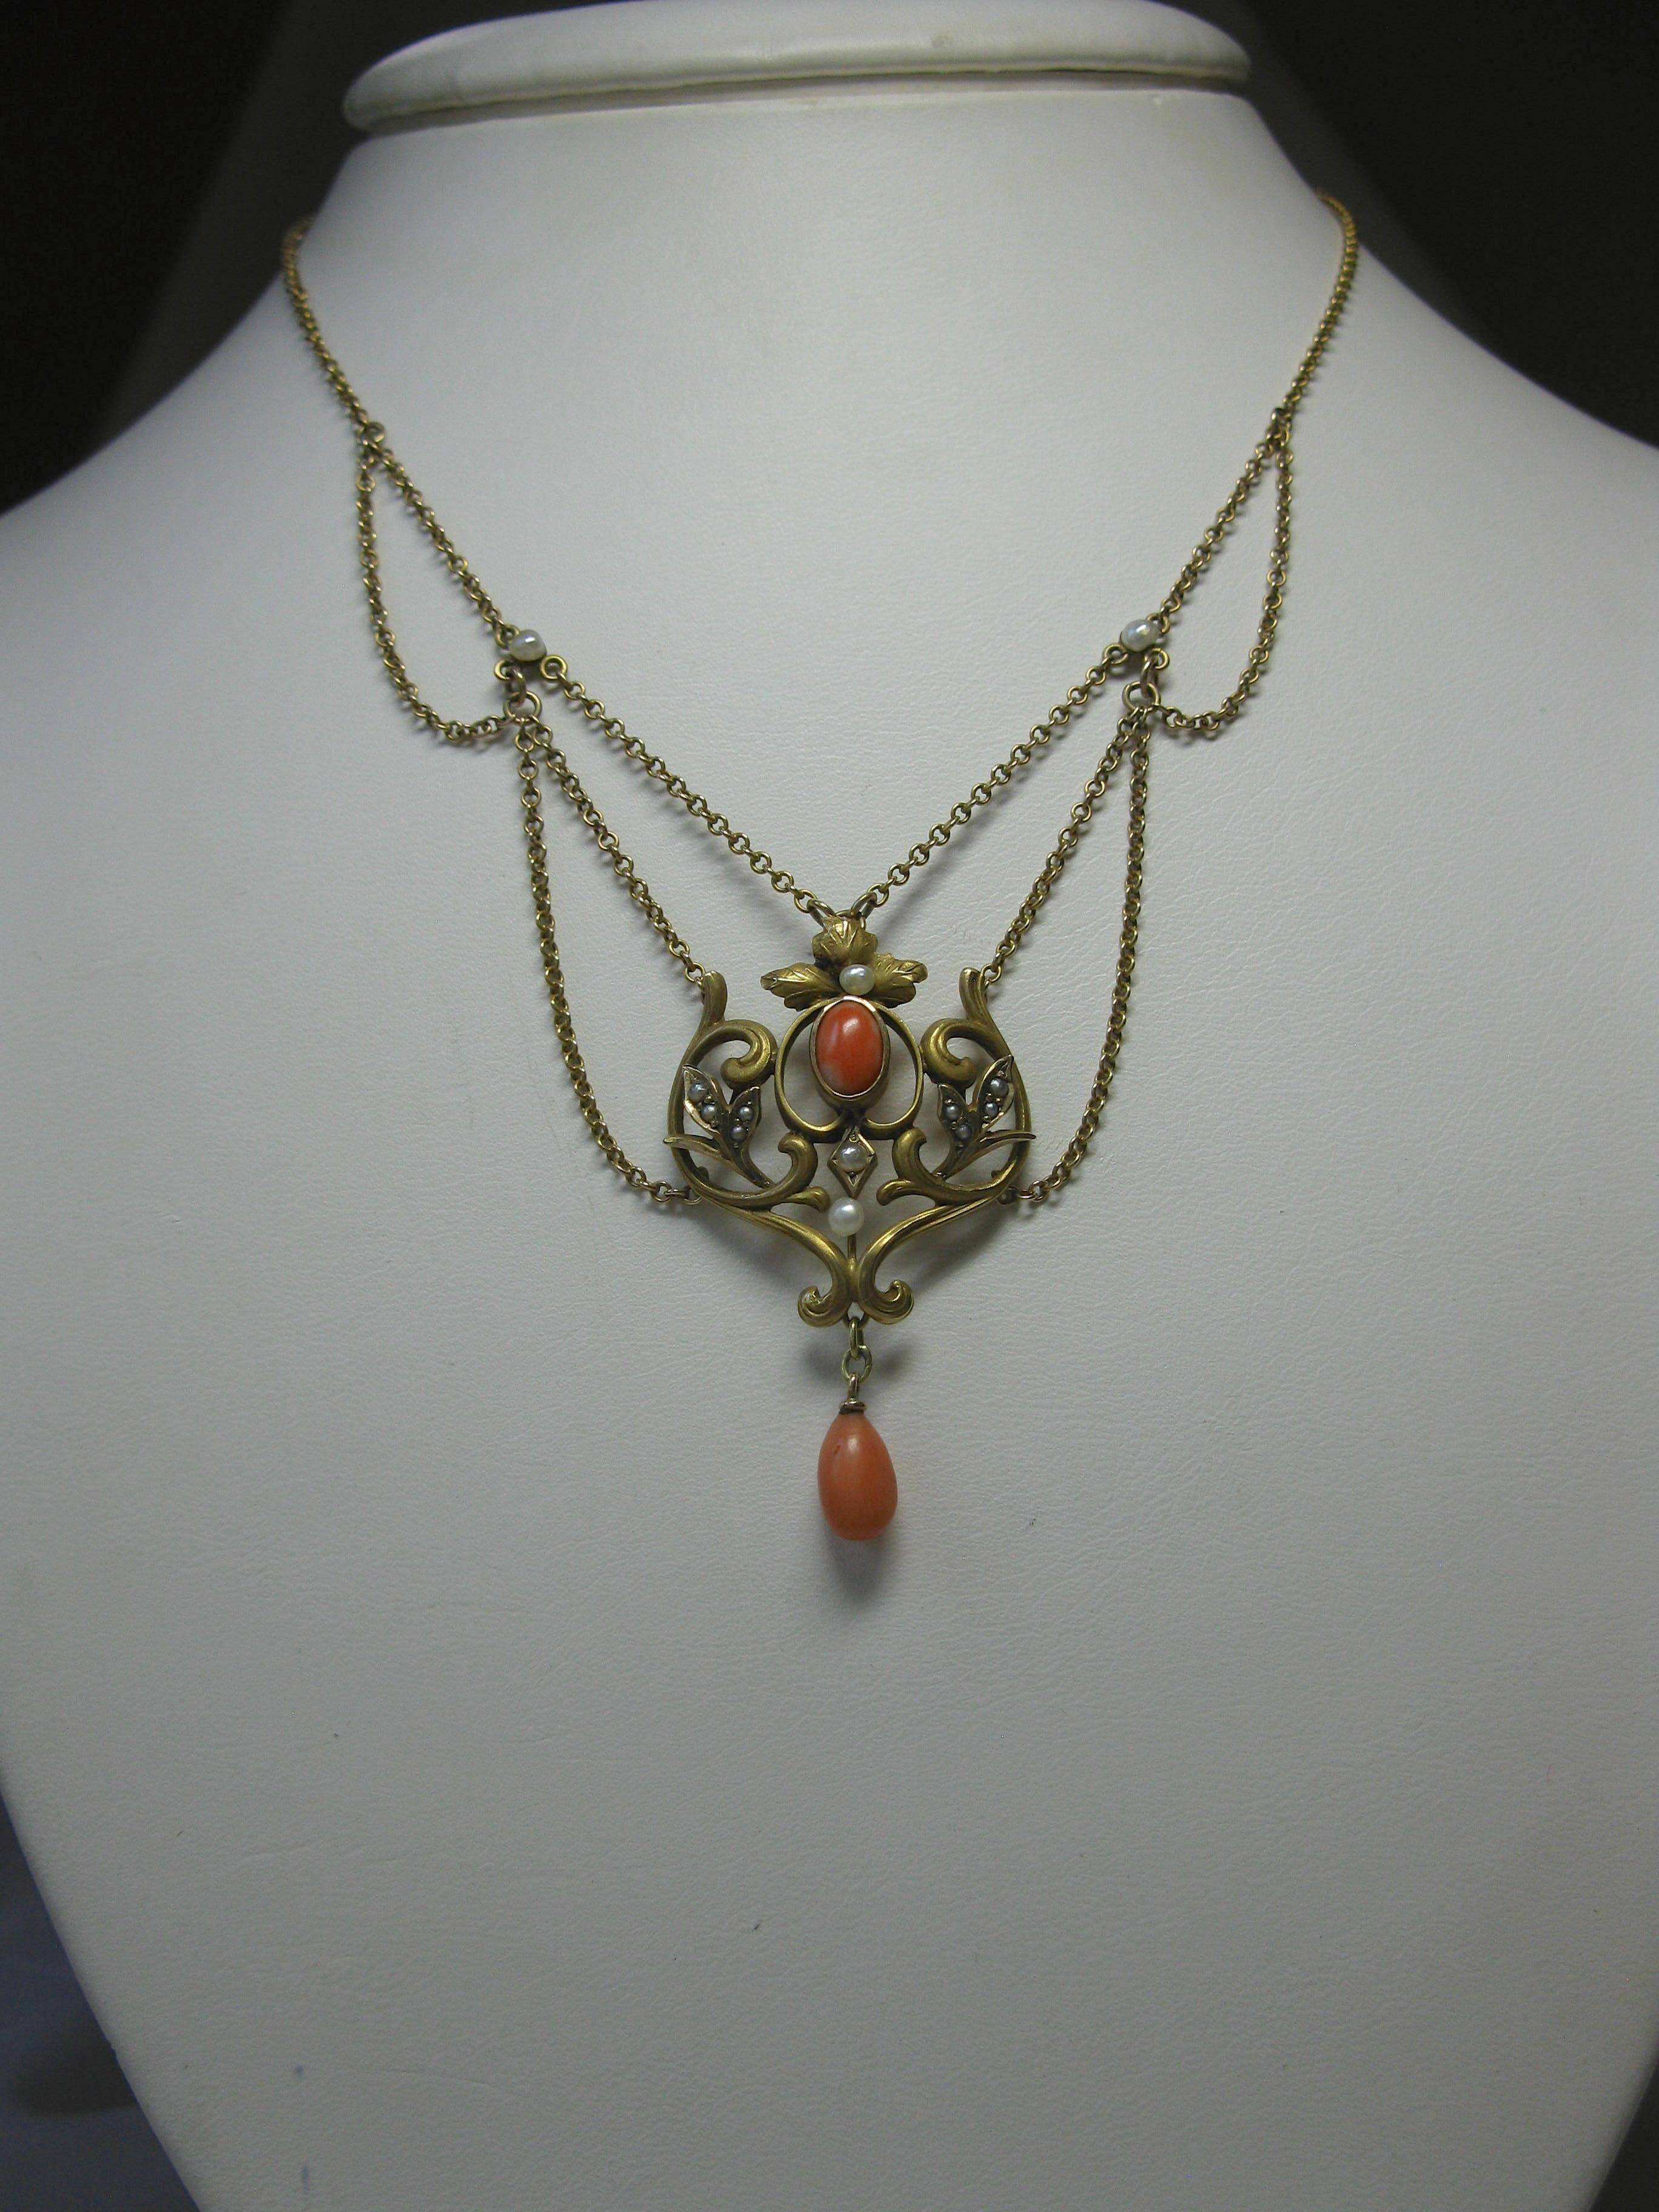 THIS IS A STUNNING VICTORIAN - ART NOUVEAU - BELLE EPOQUE FESTOON NECKLACE WITH THE MOST GORGEOUS NATURAL SALMON CORAL CABOCHONS AND PENDANT WITH SEED PEARLS IN A CLASSIC FLORAL FLOWER MOTIF OPEN WORK SWAG DESIGN IN 10K ROSE GOLD DATING TO CIRCA